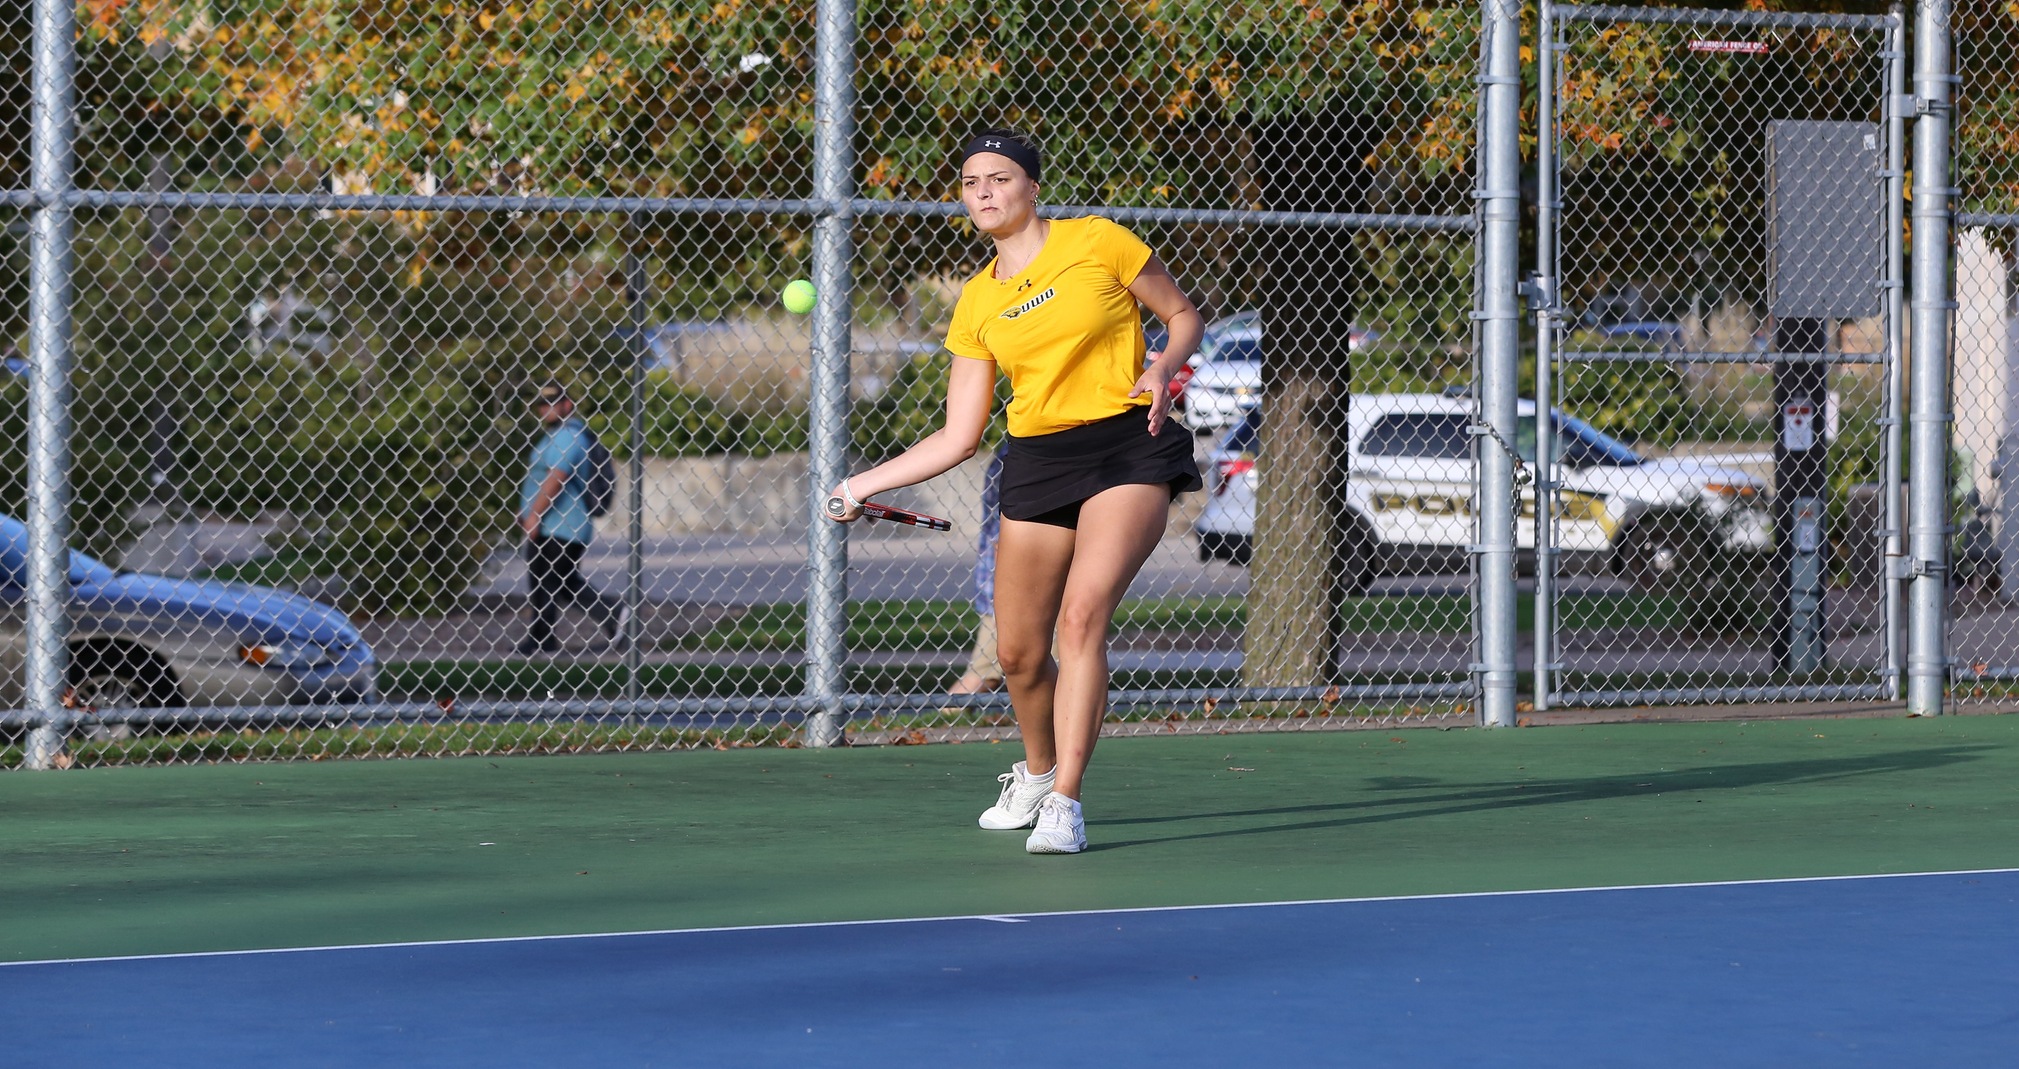 Kelley Hodyl was a winner at both No. 3 singles and No. 1 doubles against the Raiders.